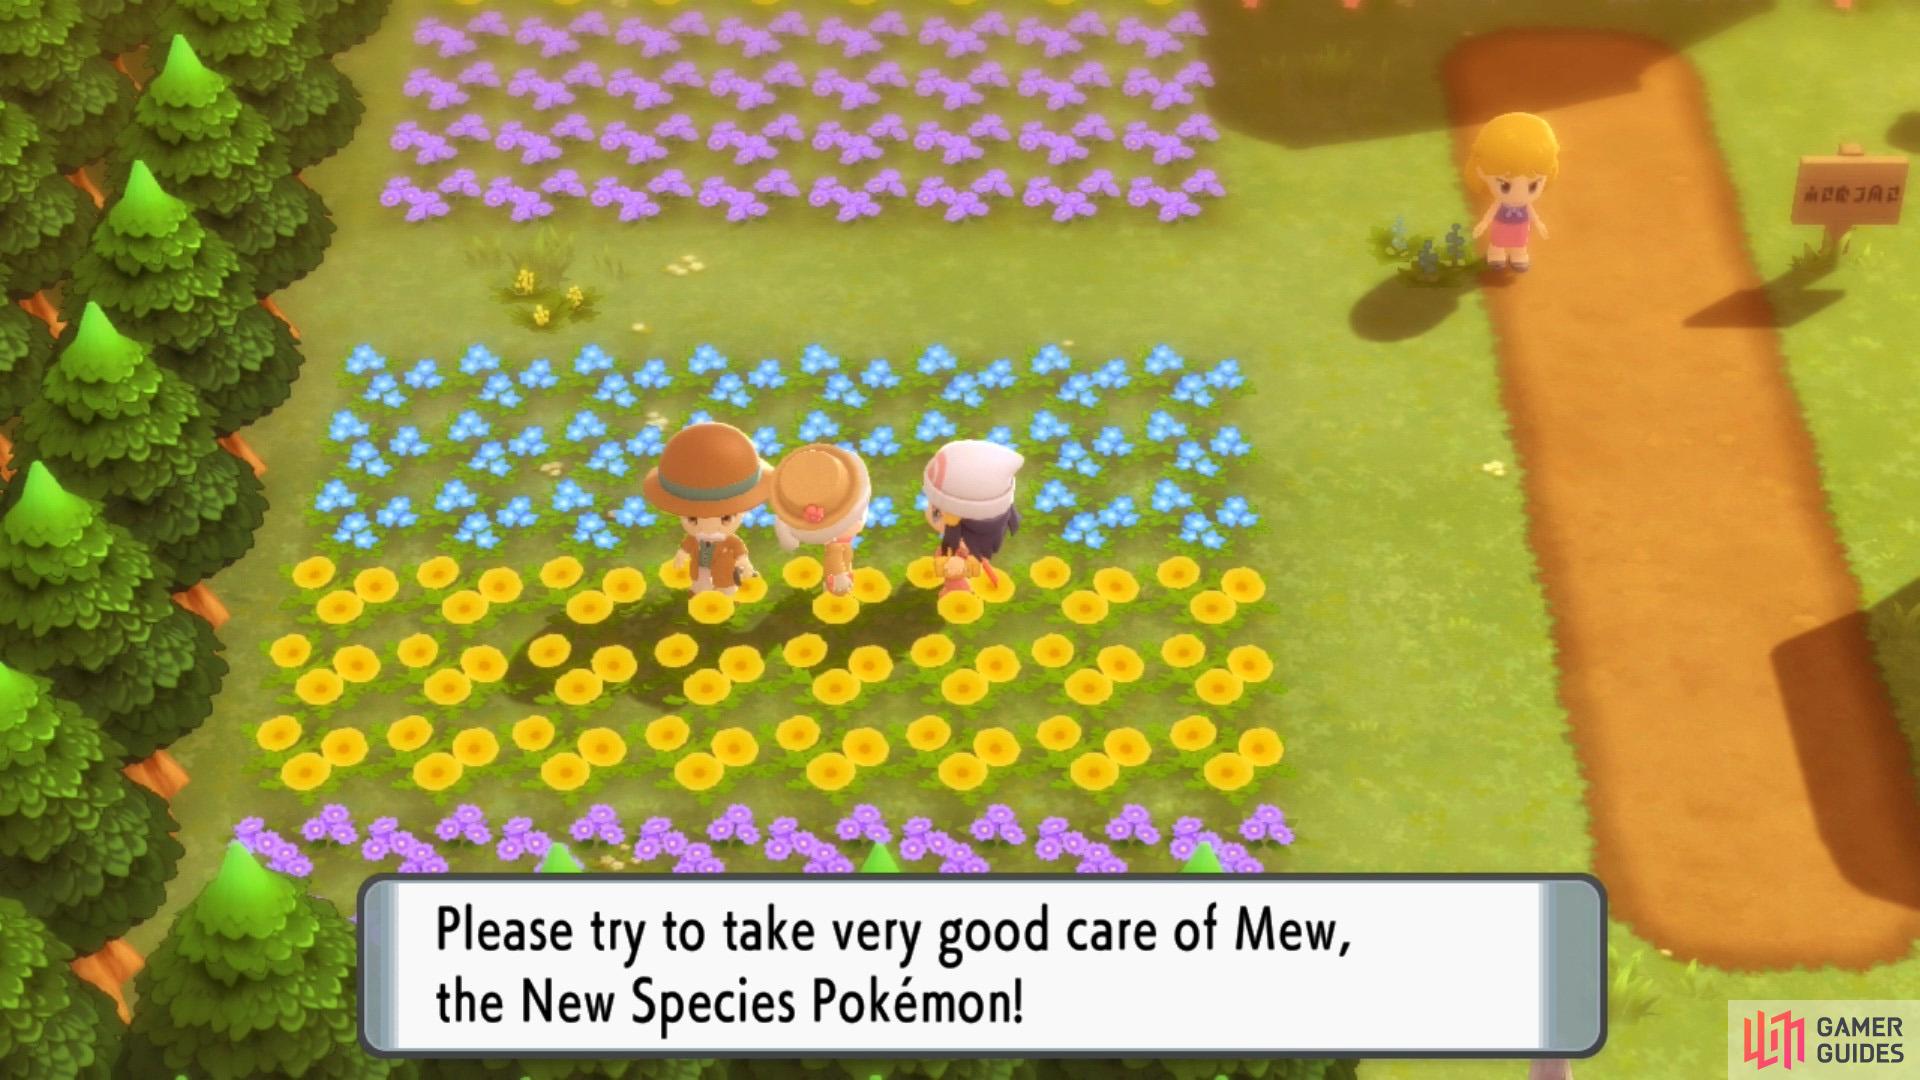 Chat to the kind lady to adopt Mew from the Kanto region.